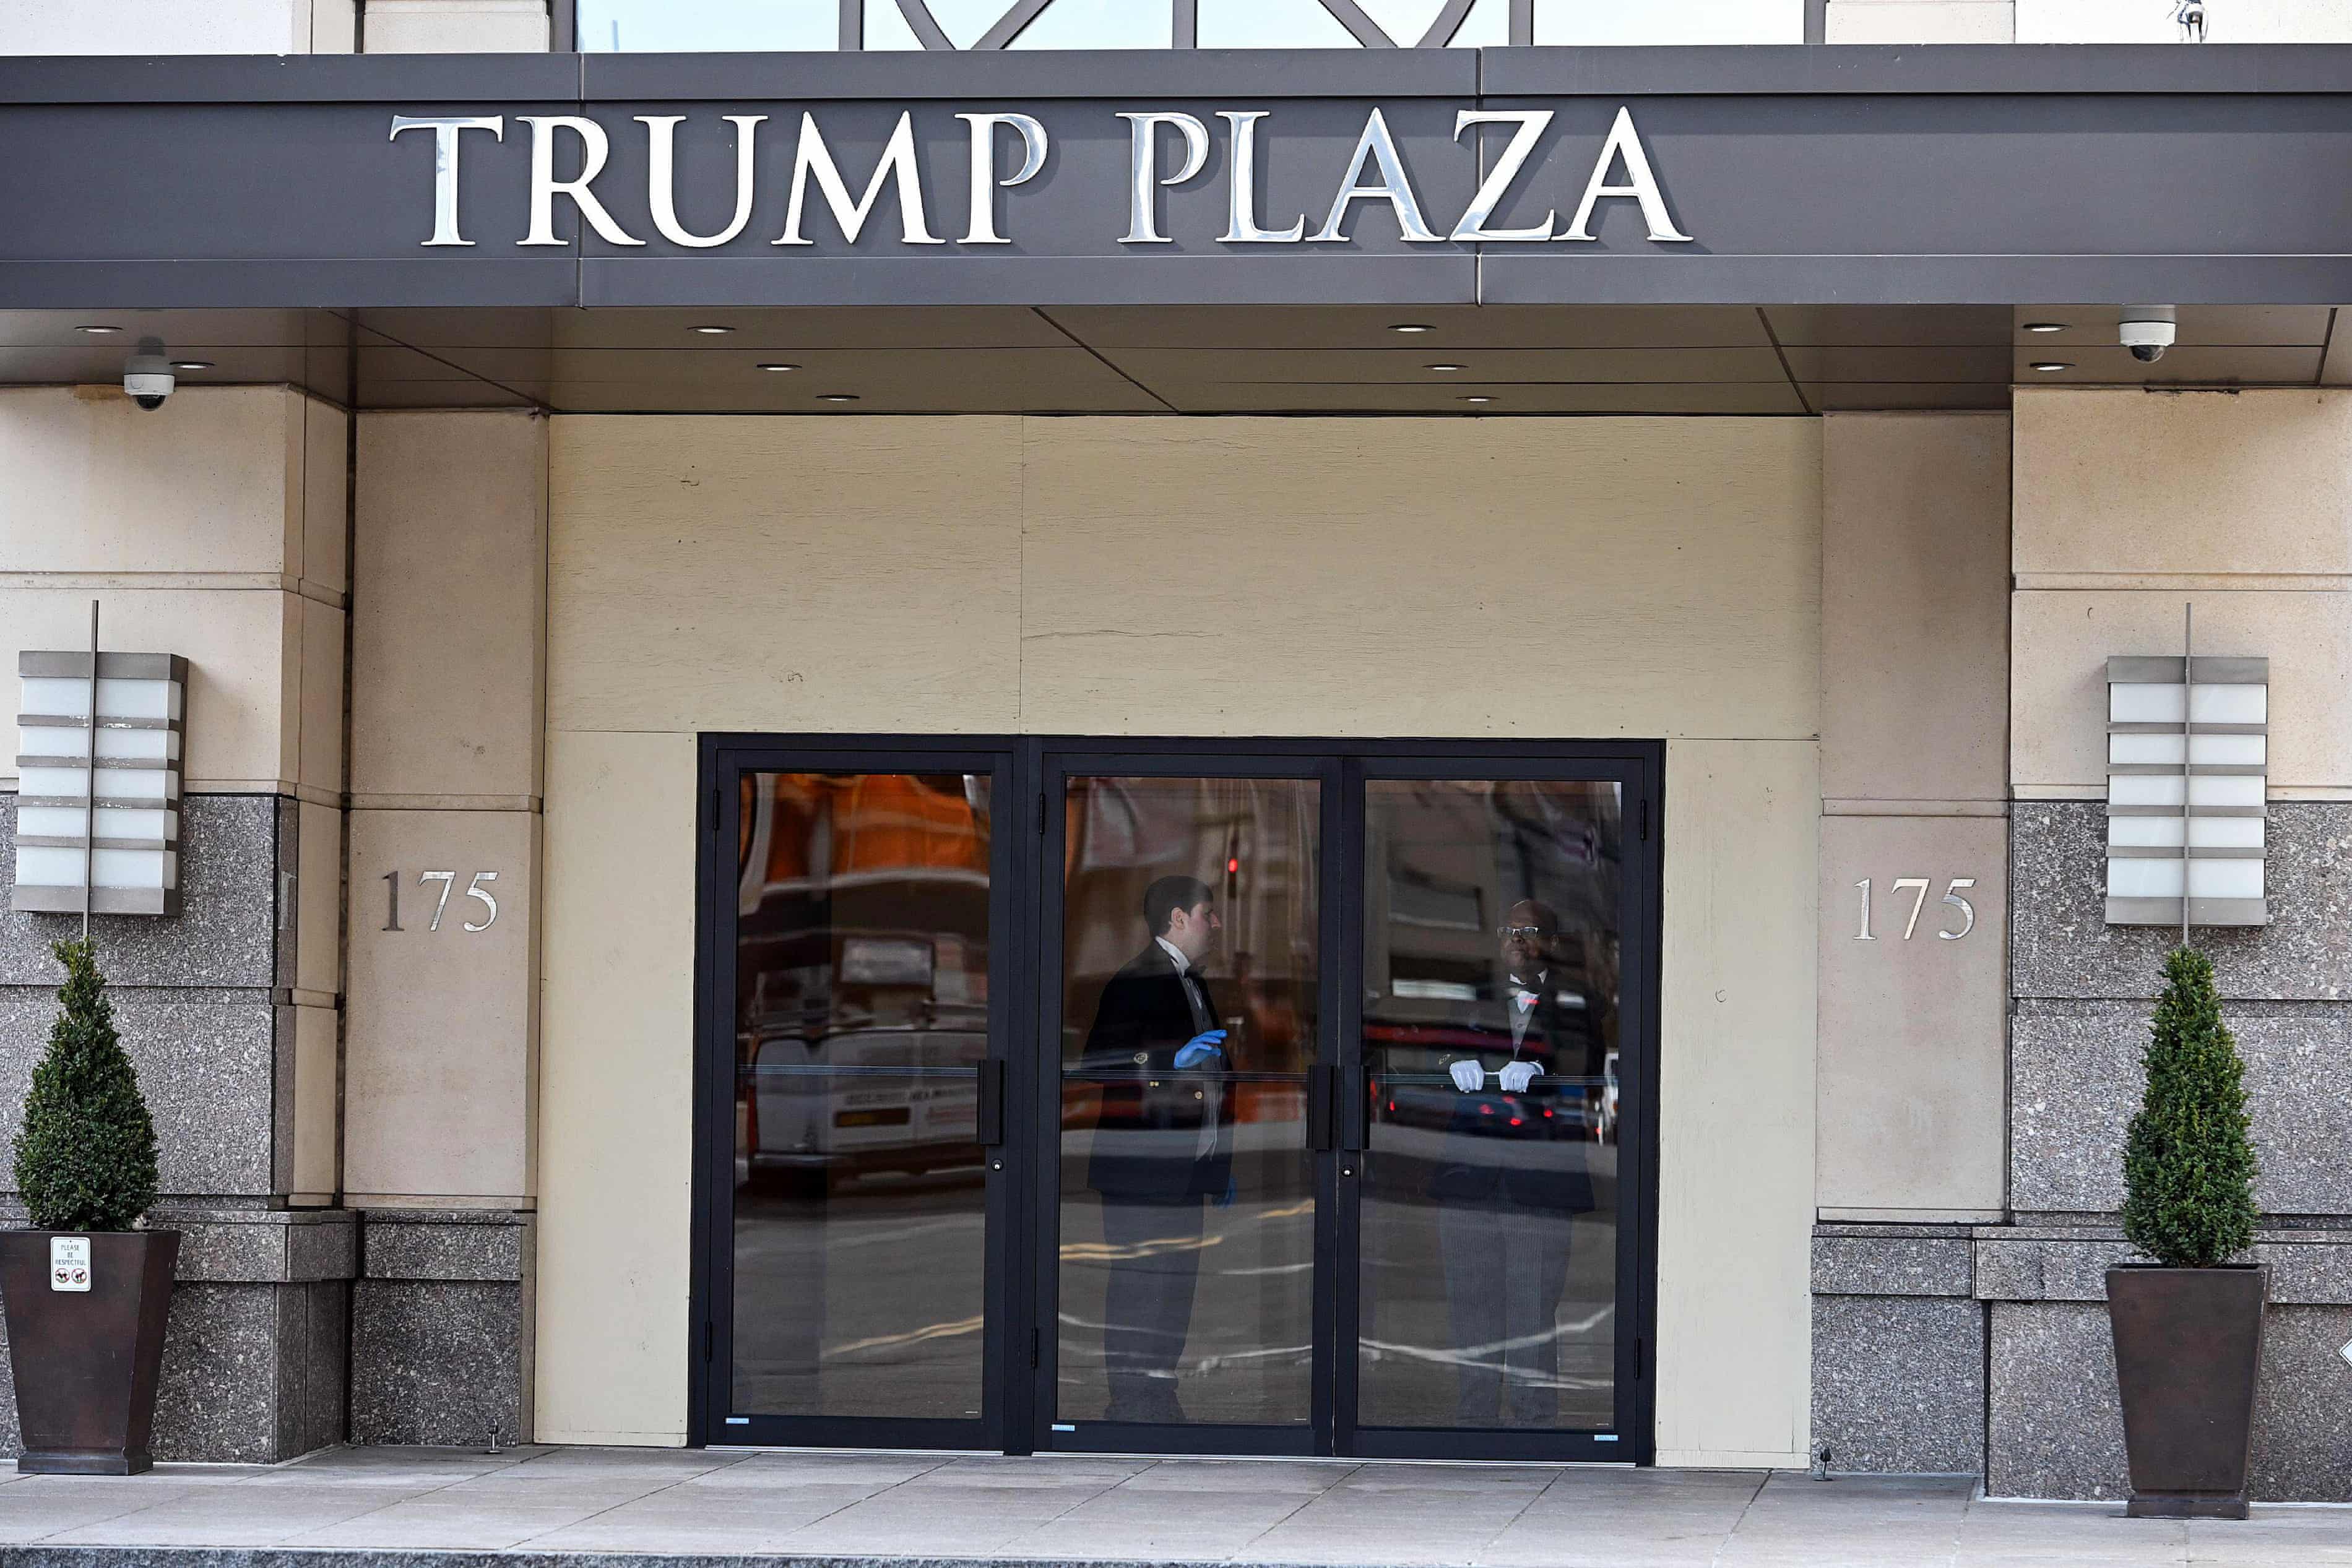 Residents push for renaming of a Trump-branded building to disassociate from ex-president (theguardian.com)